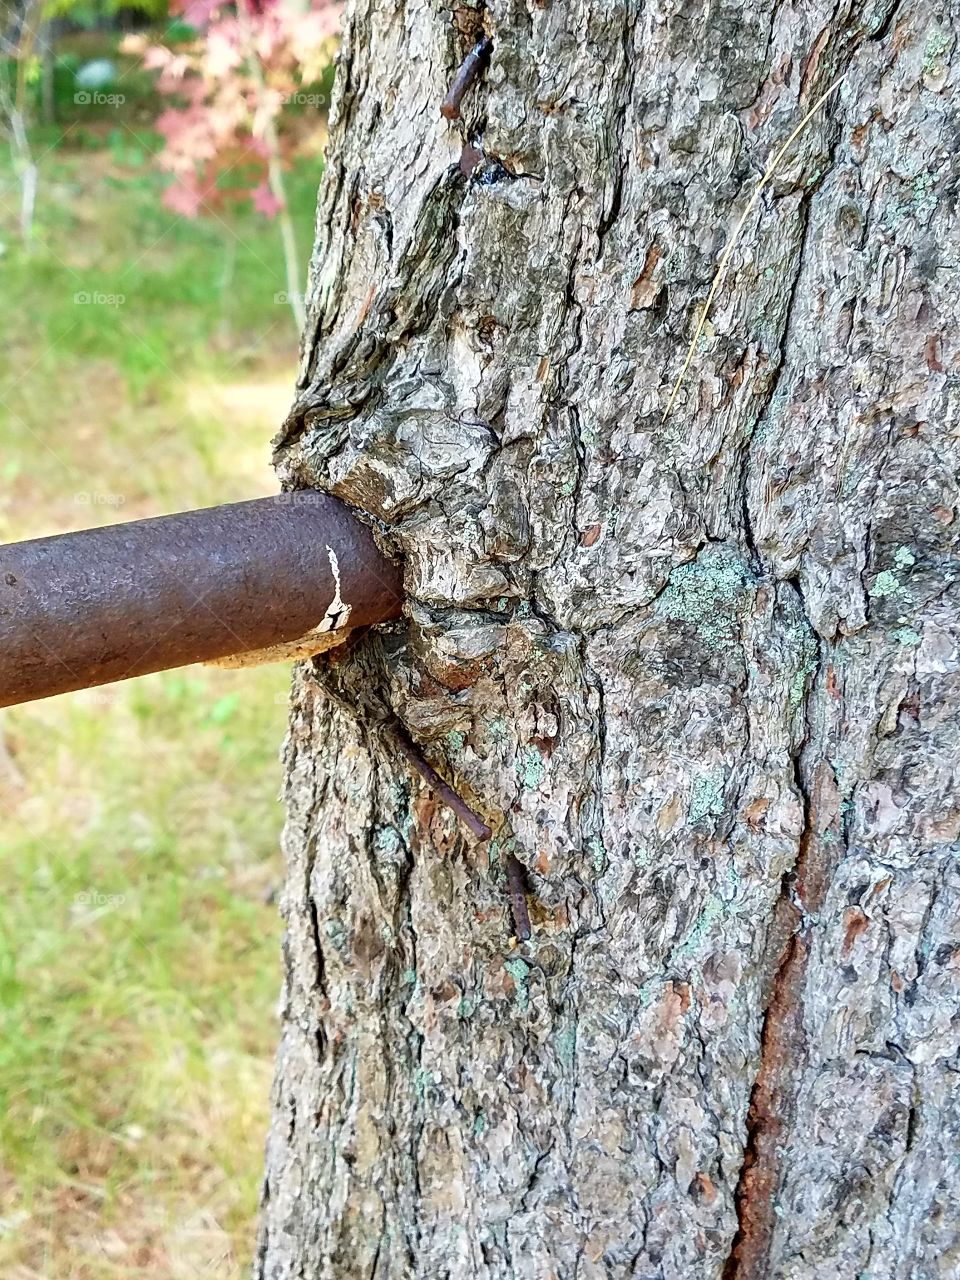 Metal Pipe embedded into Pine Tree Bark, years old.